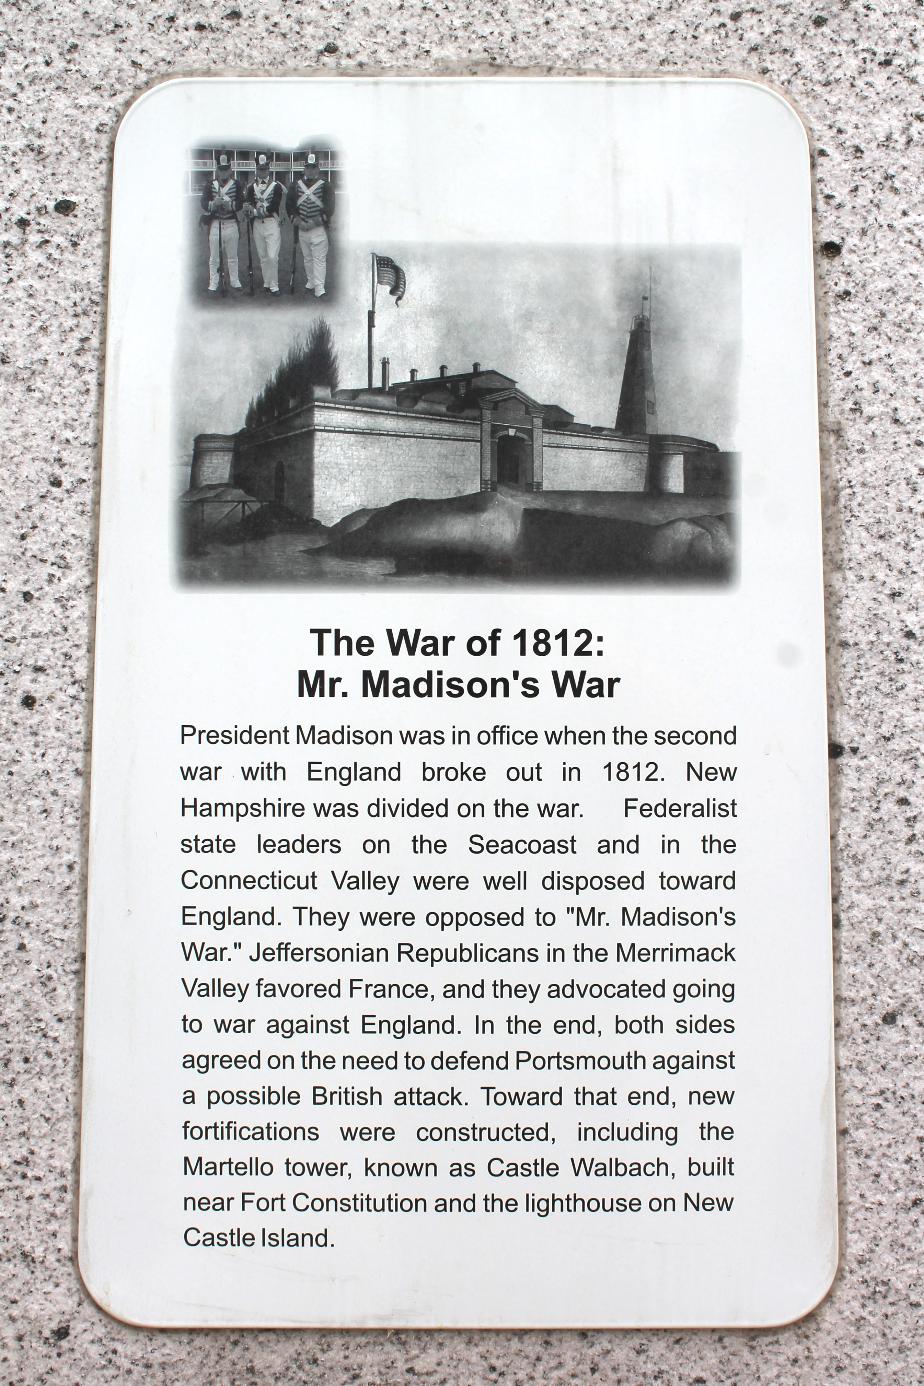 NH State Veterans Cemetery - The War of 1812 - Mr. Madison's War